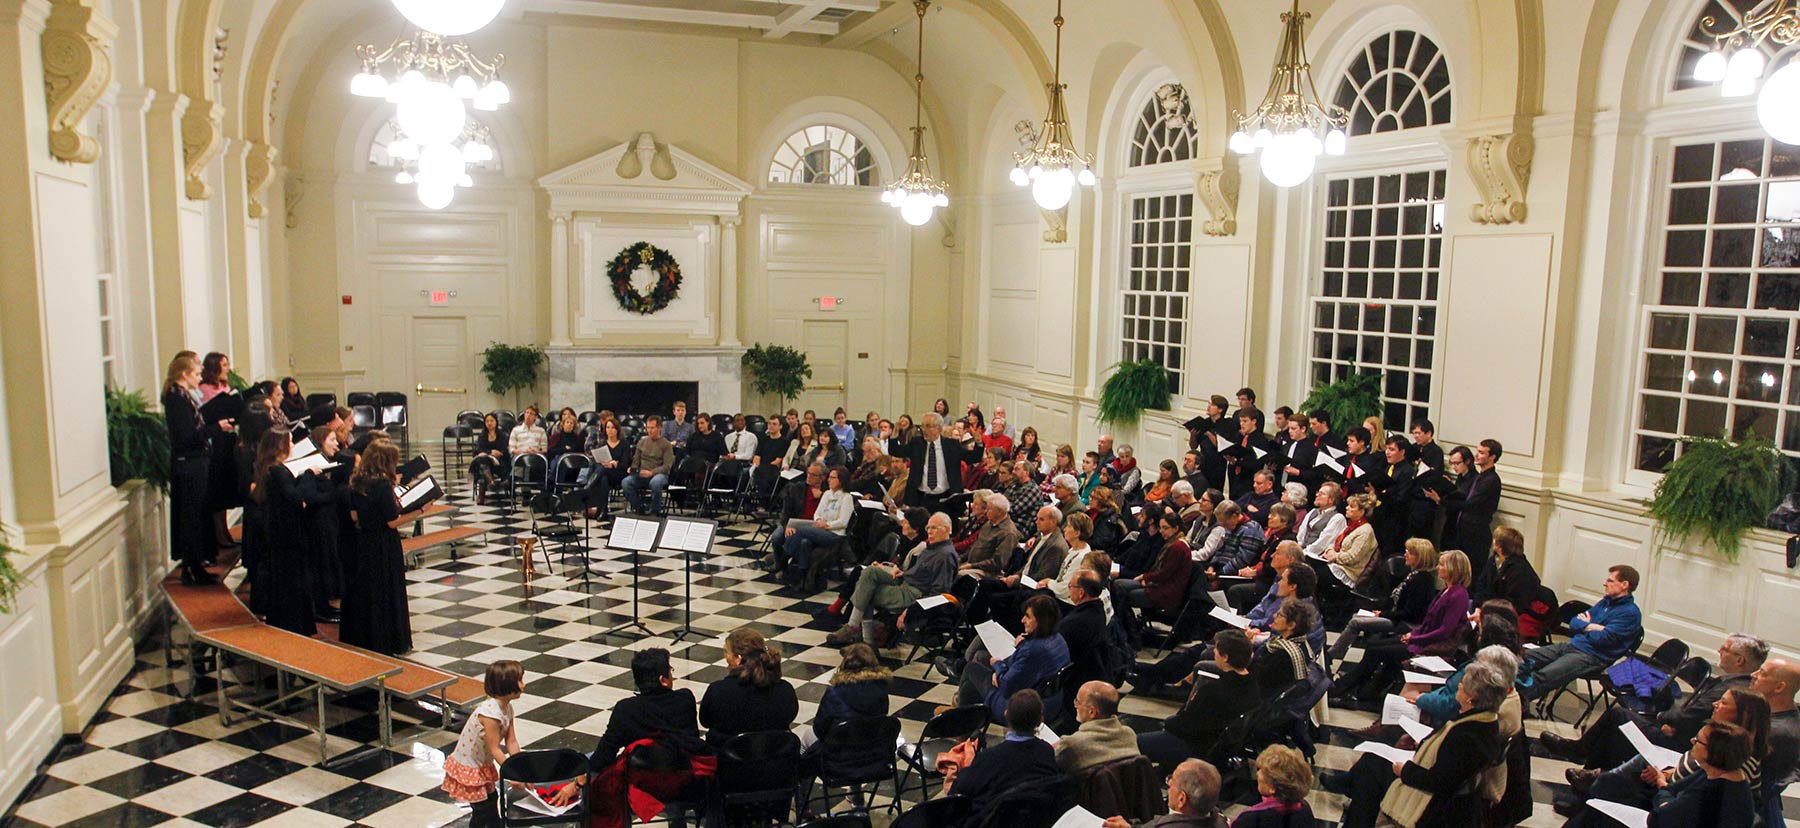 A concert being preformed in the Great Hall